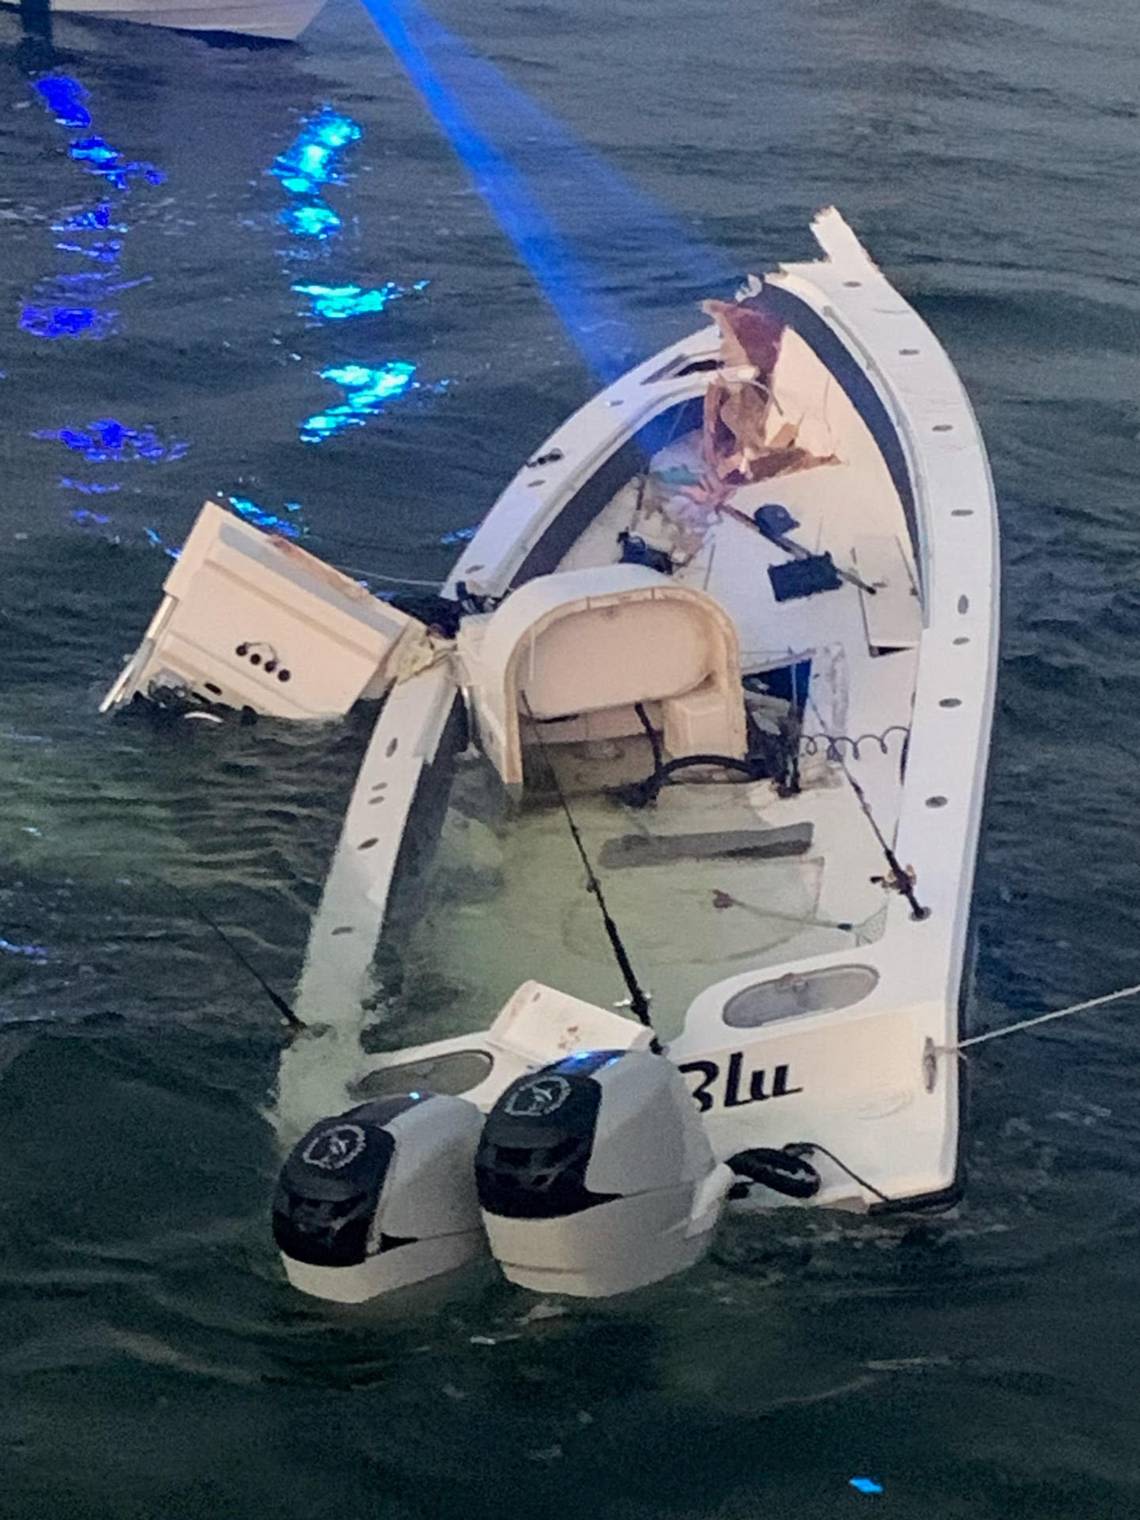 FWC: Florida Keys boat crash that caused serious injuries was ‘alcohol-related’